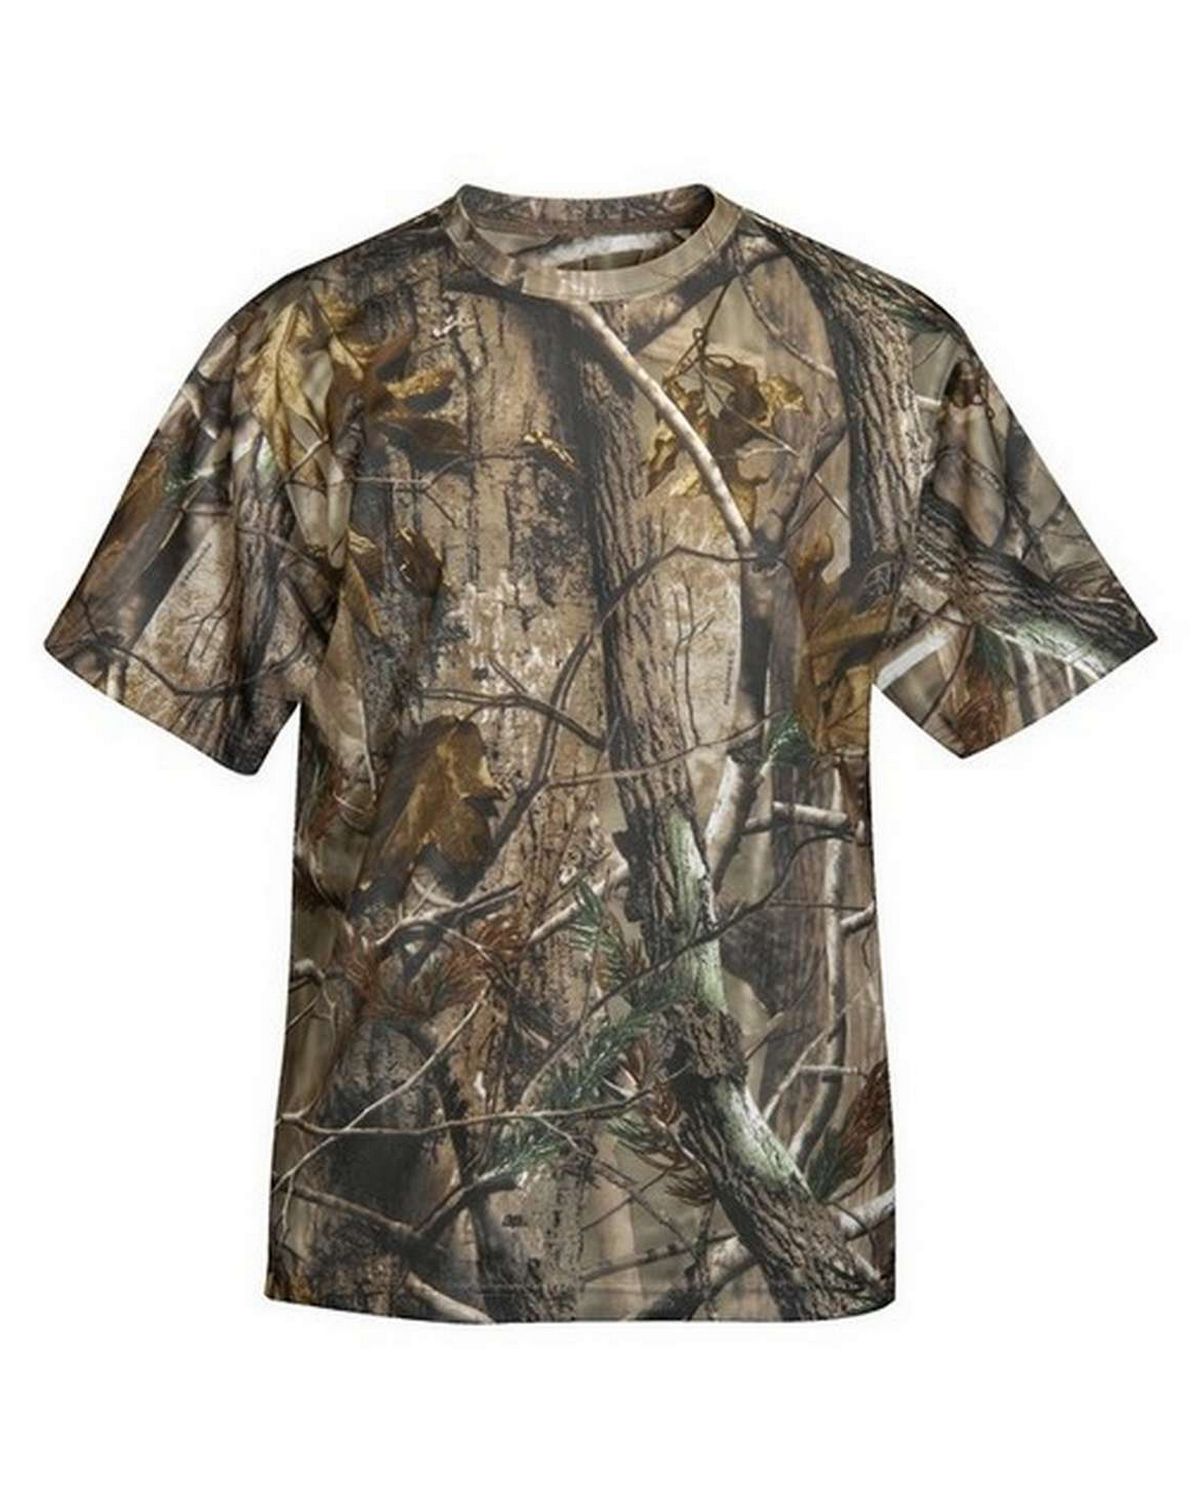 Tri-Mountain 122C mesh shirt with Realtree APÉ pattern & UltraCool